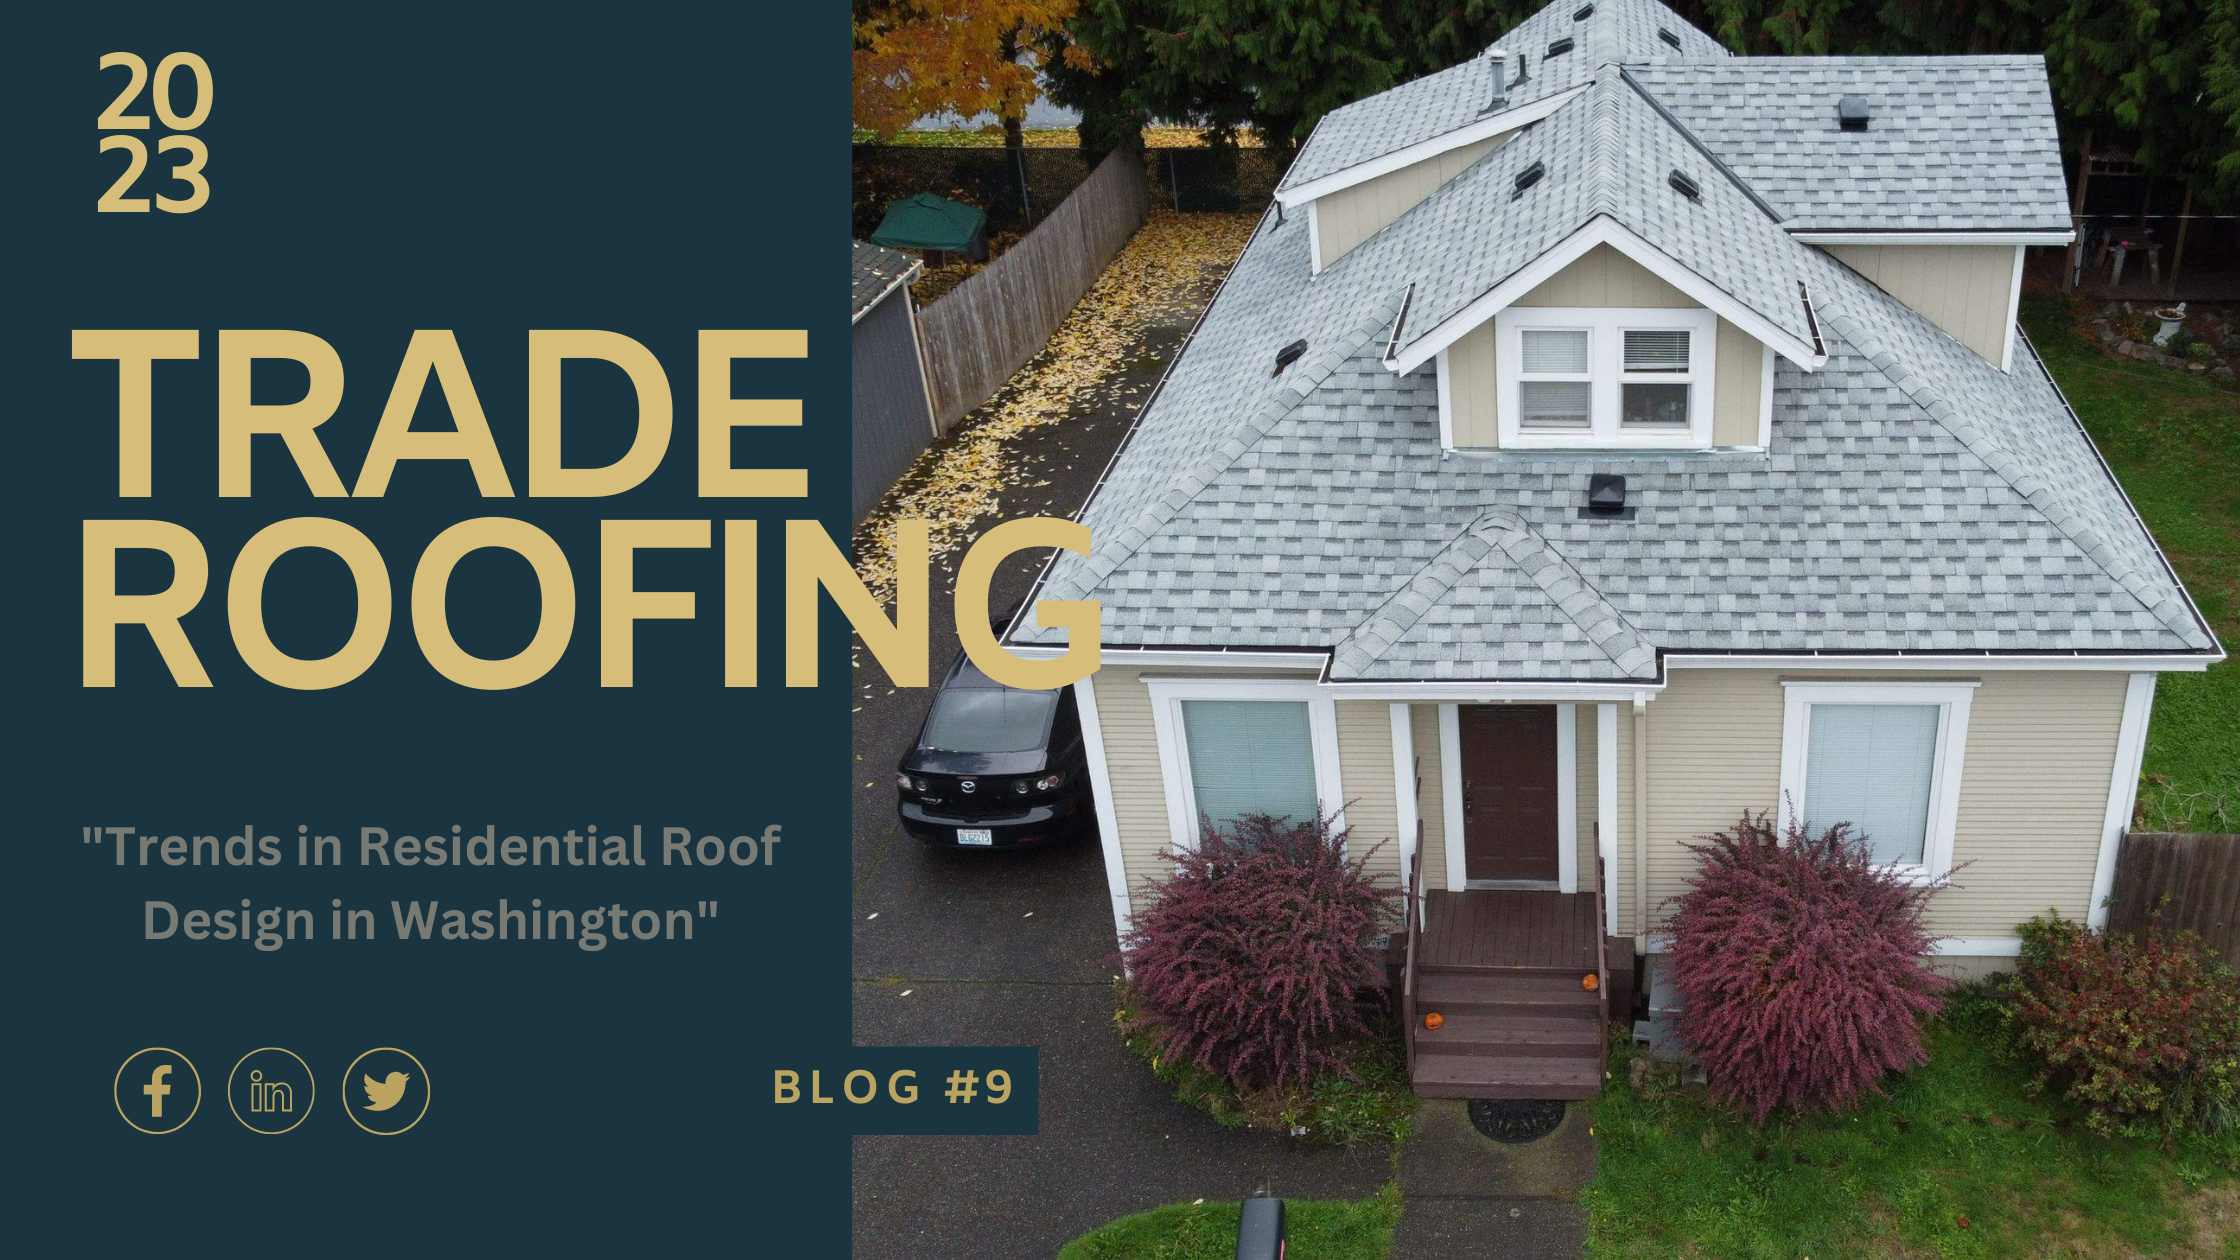 Trends in Residential Roof Design in Washington